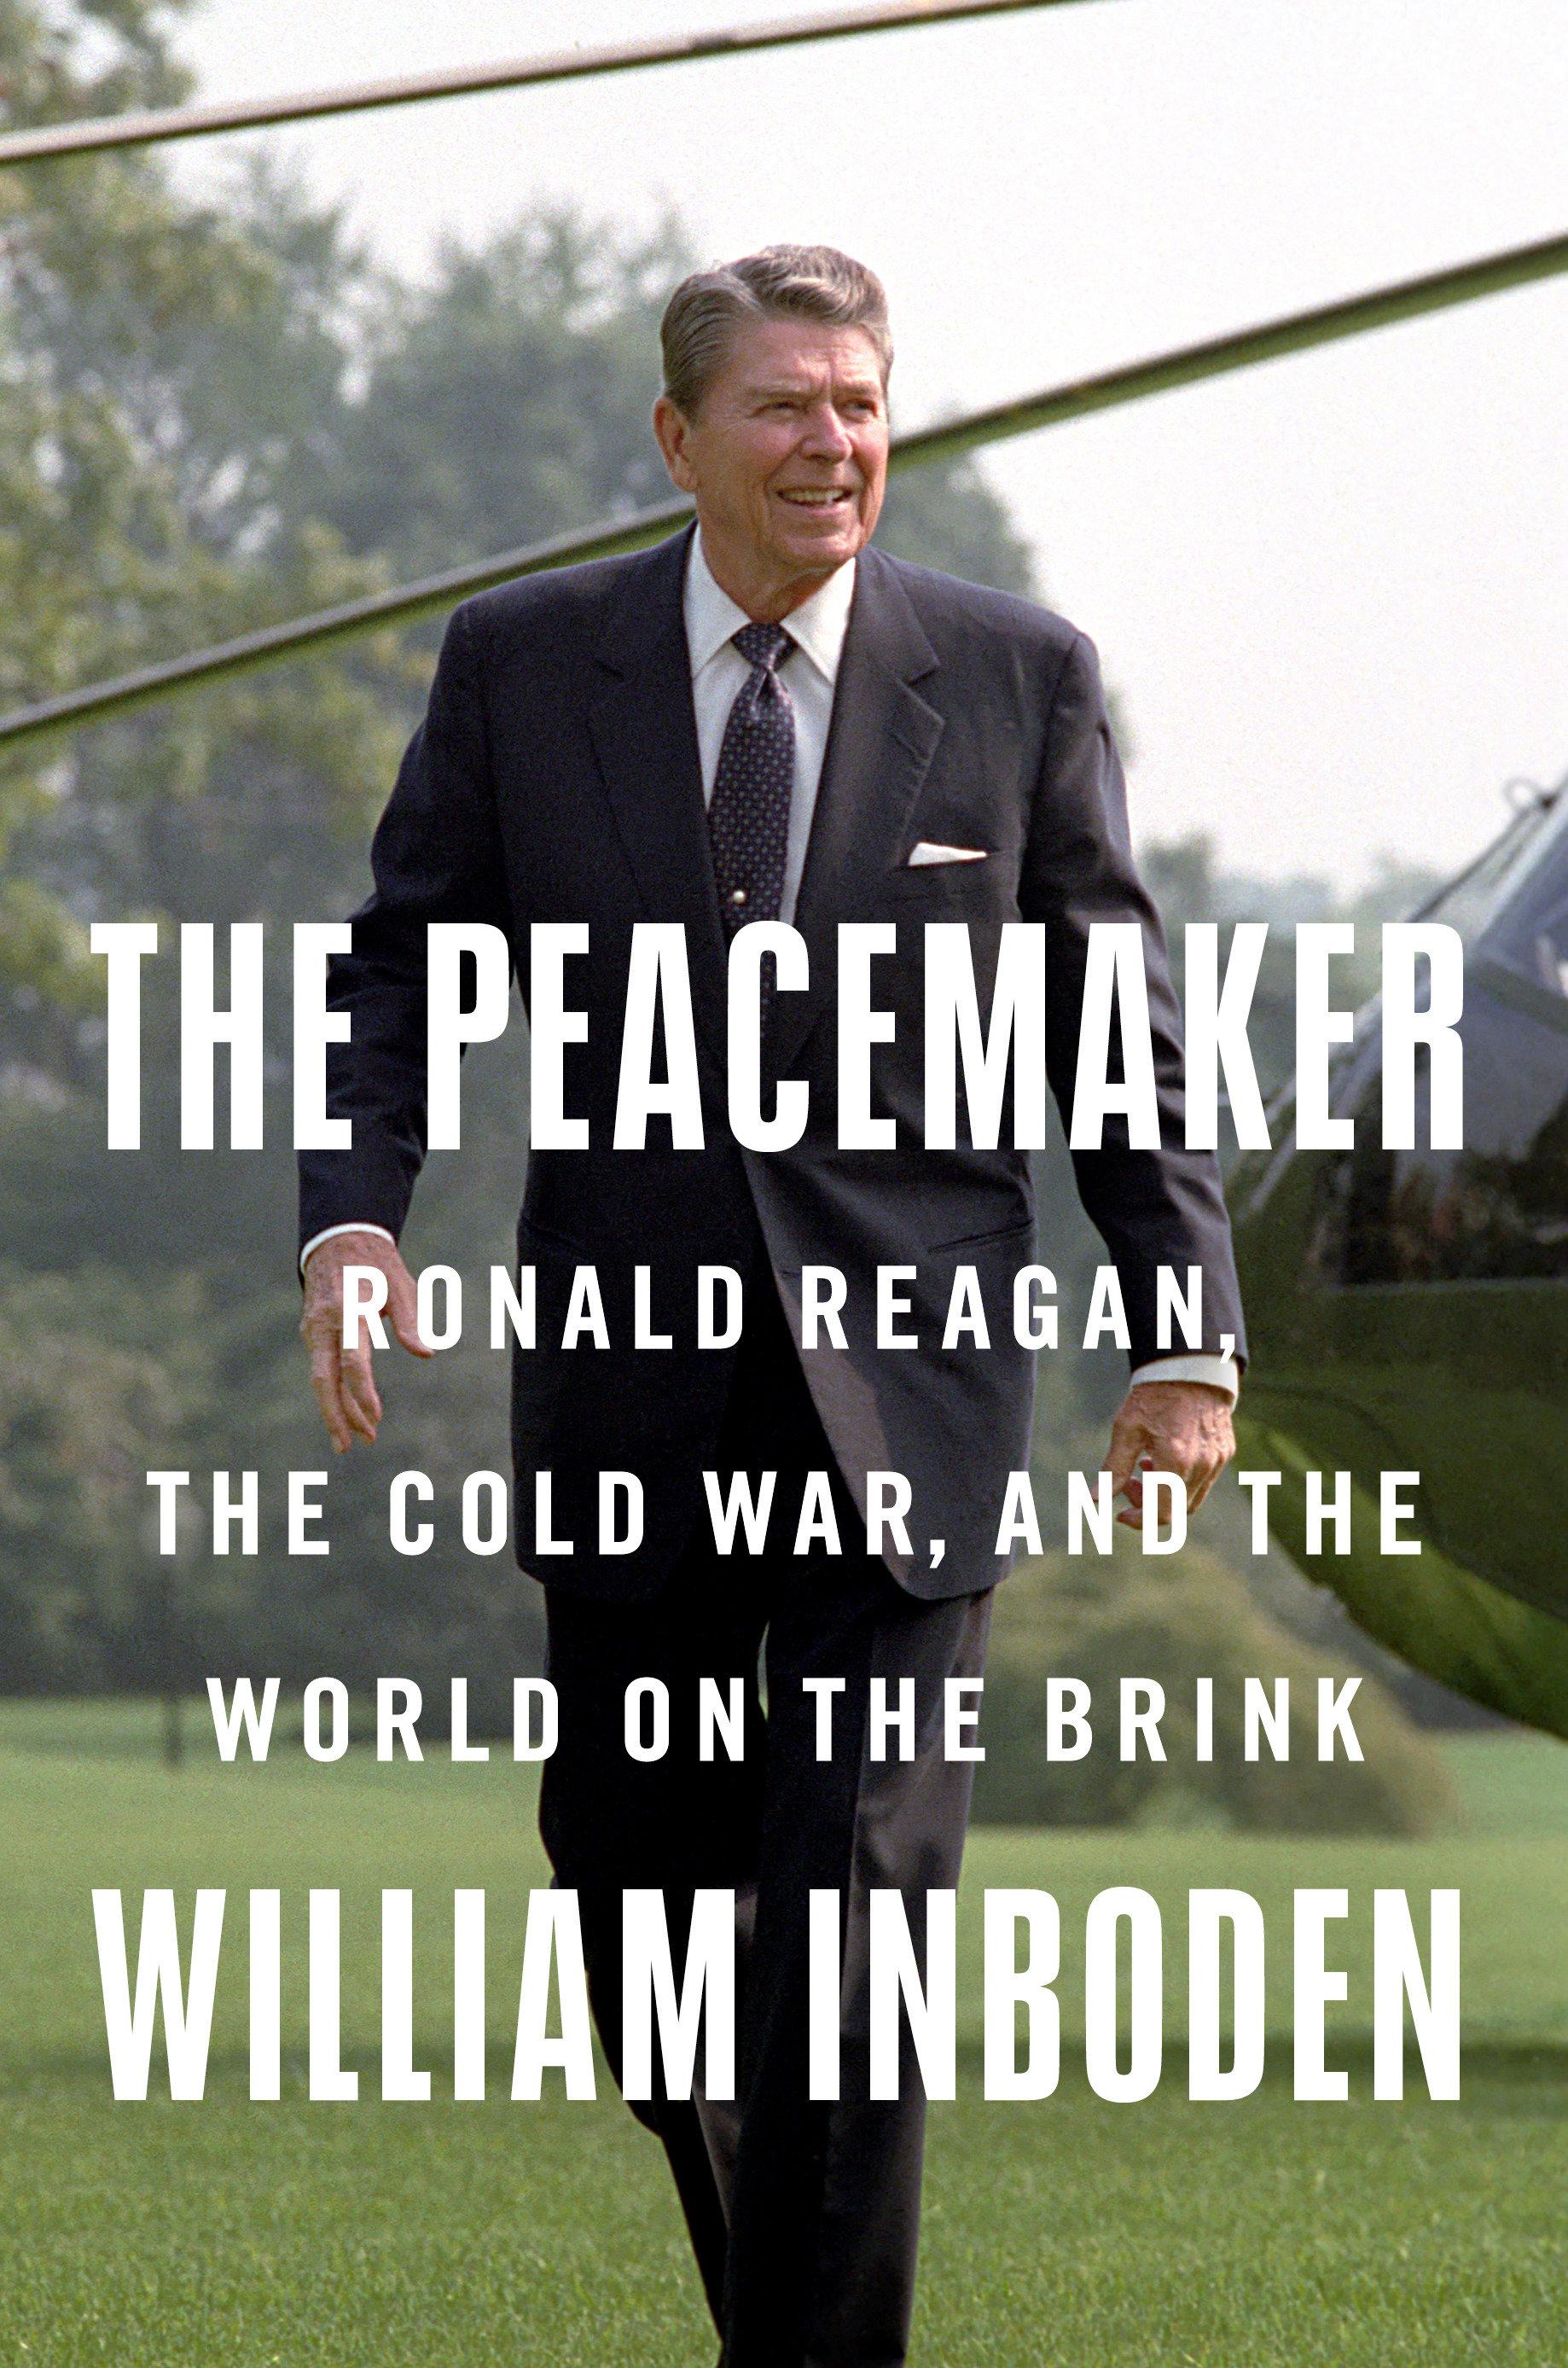 The Peacemaker / Ronald Reagan, the Cold War, and the World on the Brink / William Inboden / Buch / Einband - fest (Hardcover) / Englisch / 2022 / Penguin Publishing Group / EAN 9781524745899 - Inboden, William